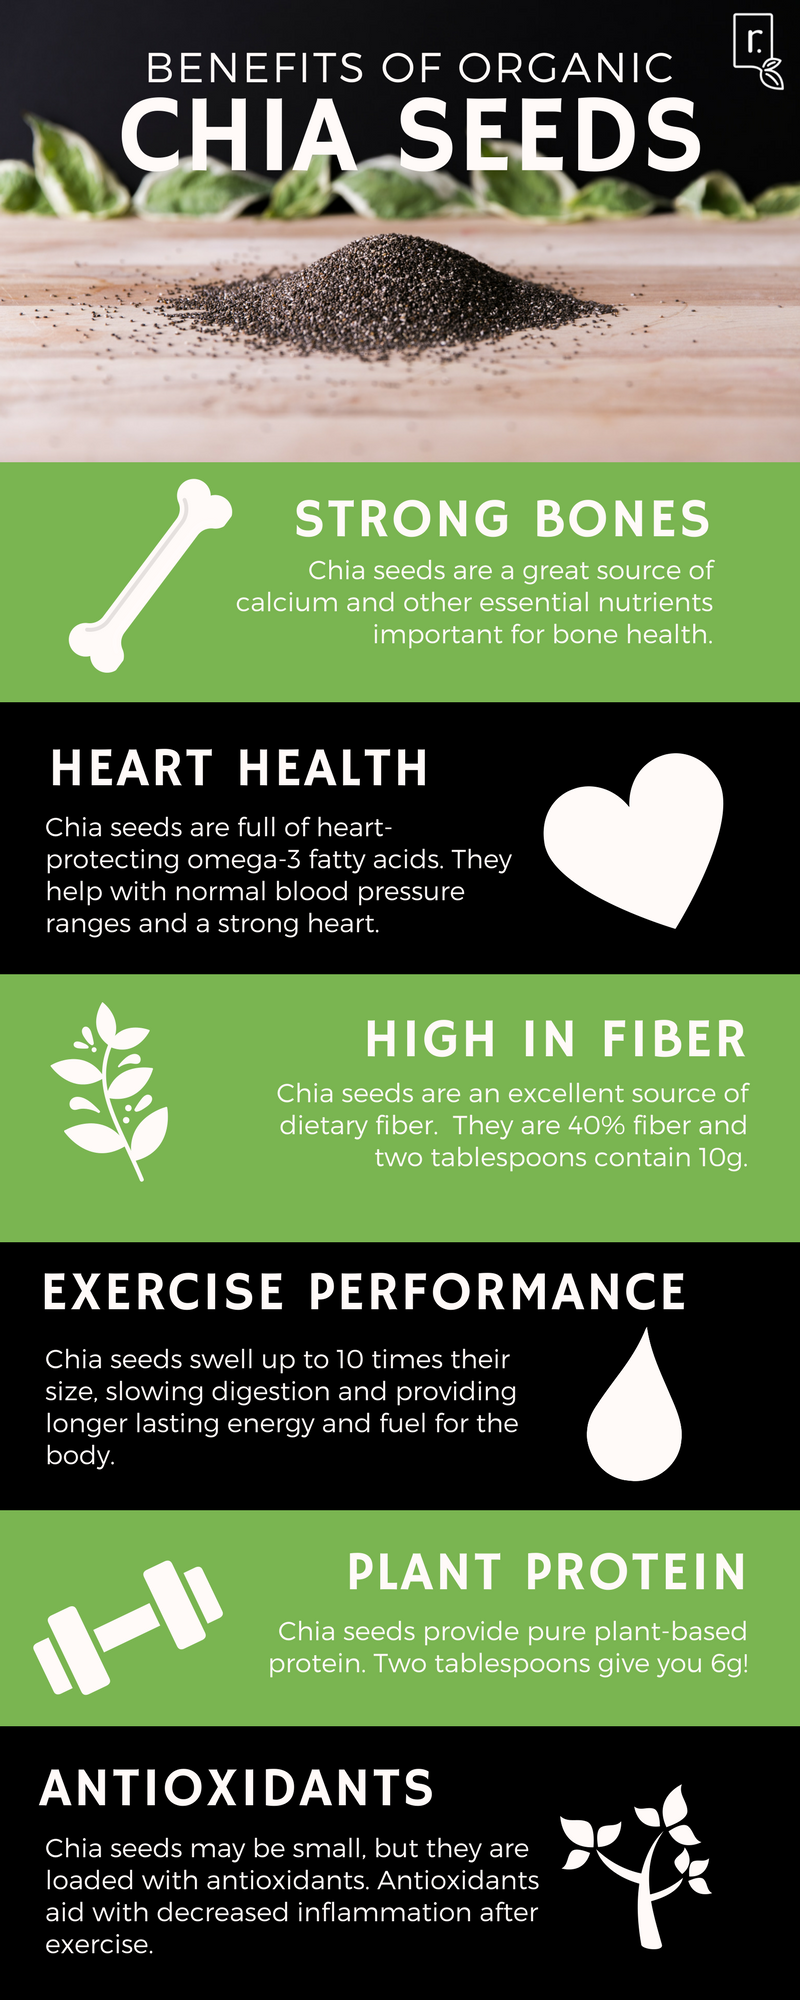 Benefits of Chia seeds (2)